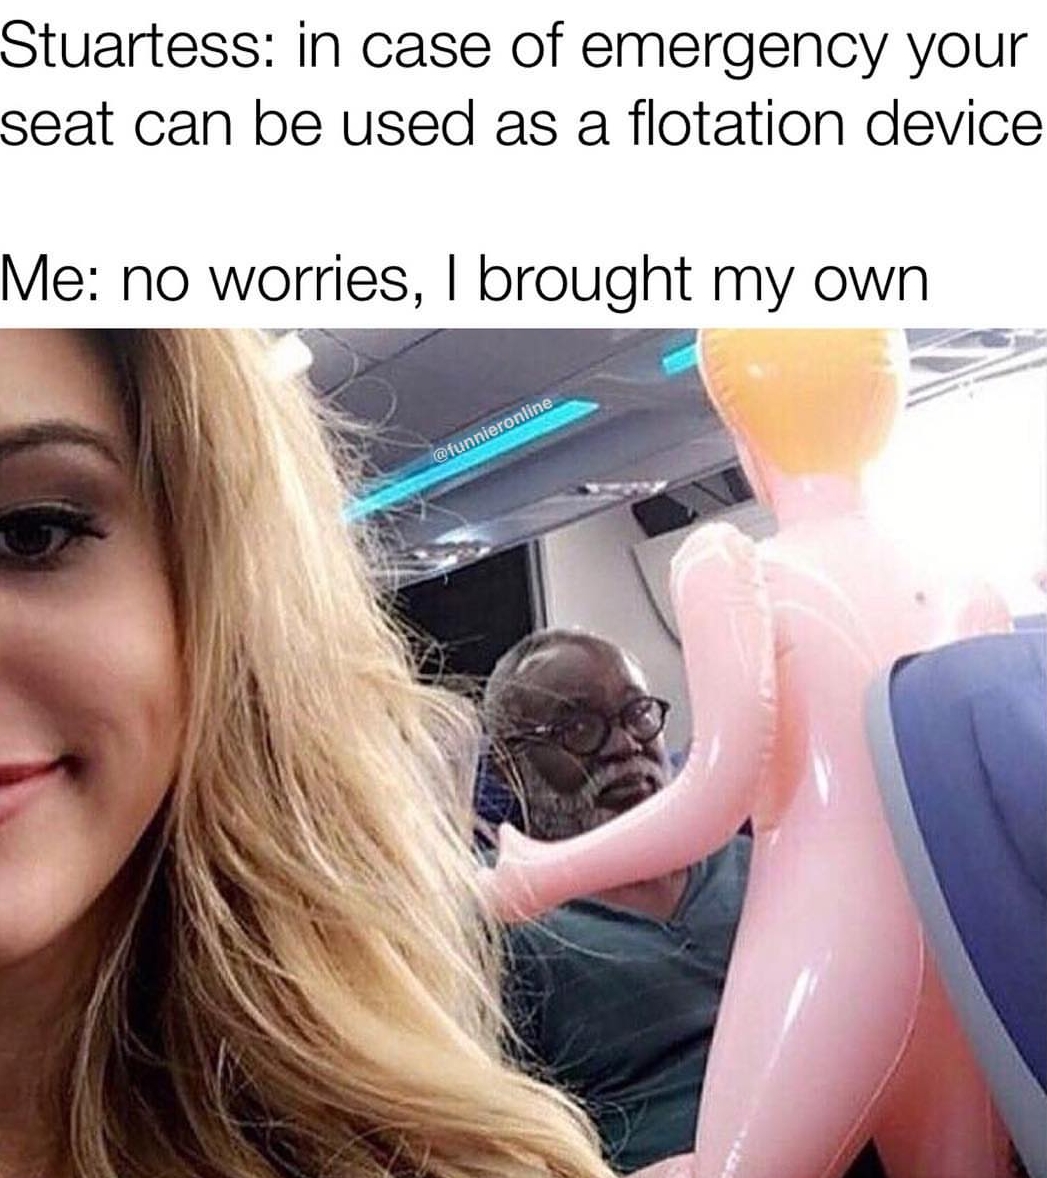 meme stream - funny things on airplane - Stuartess in case of emergency your seat can be used as a flotation device Me no worries, I brought my own